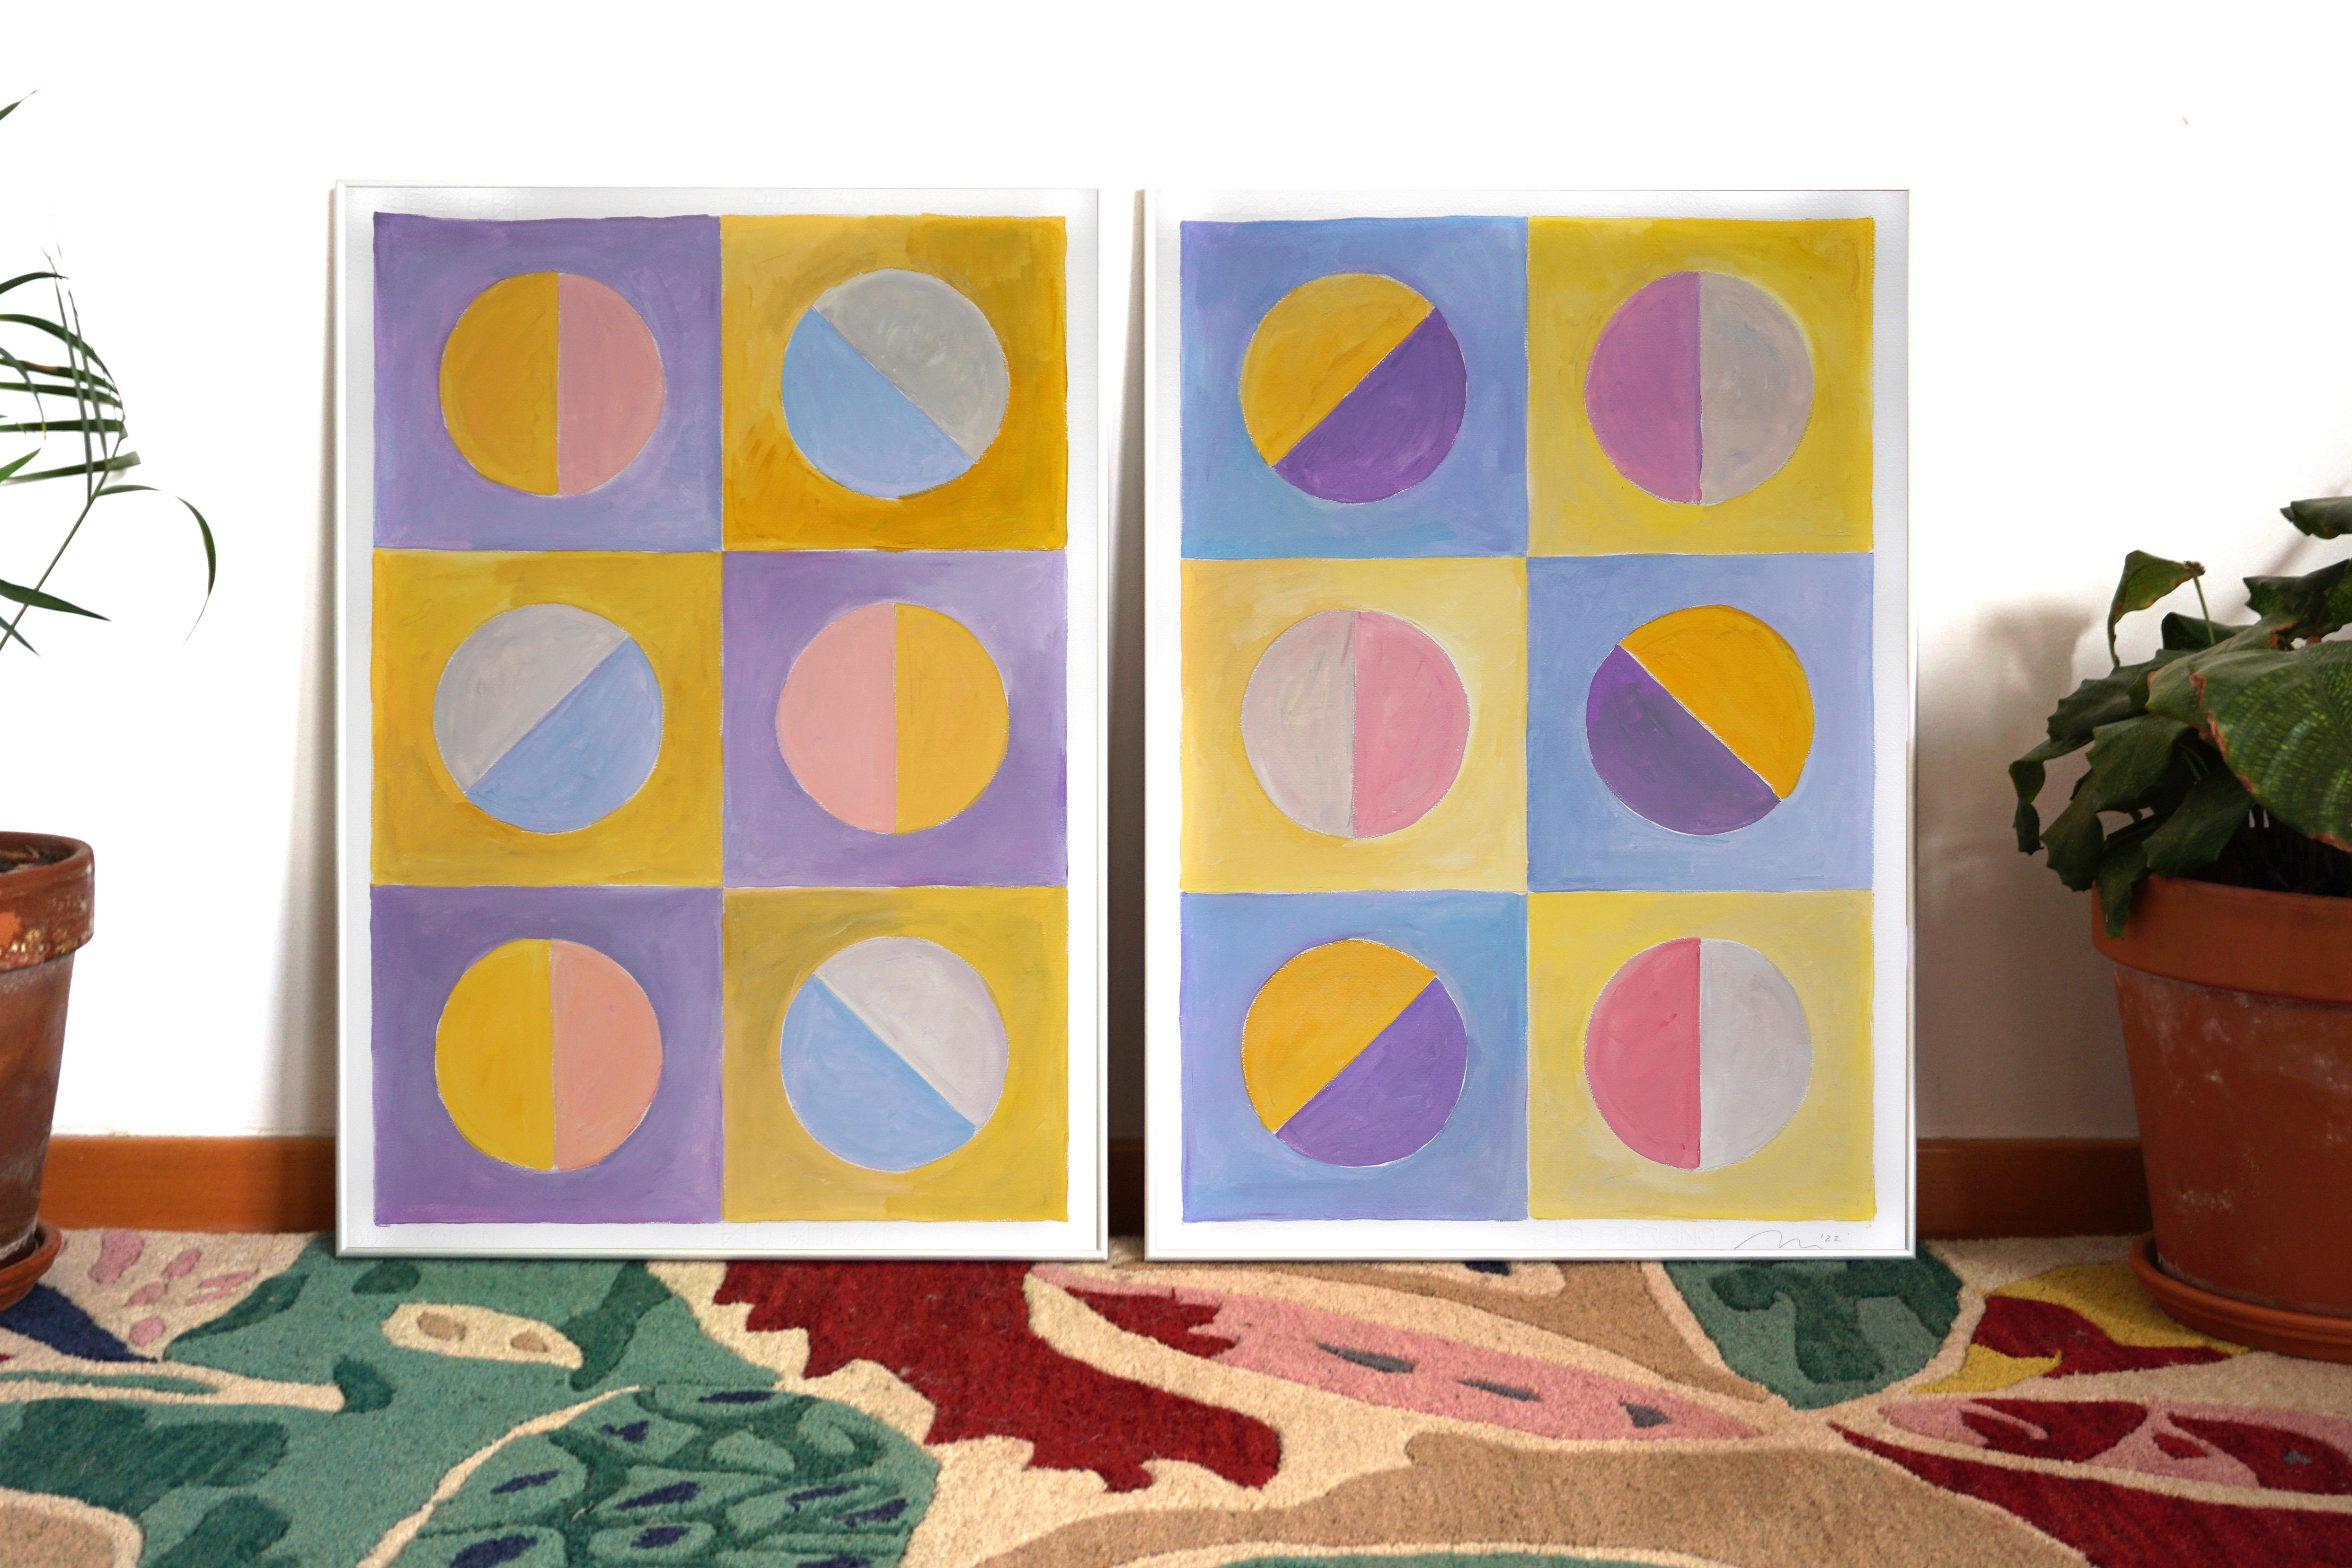 Surreal Pastel Dream, Cream and Pink, Bauhaus Geometry Diptych, Tiles Pattern 2